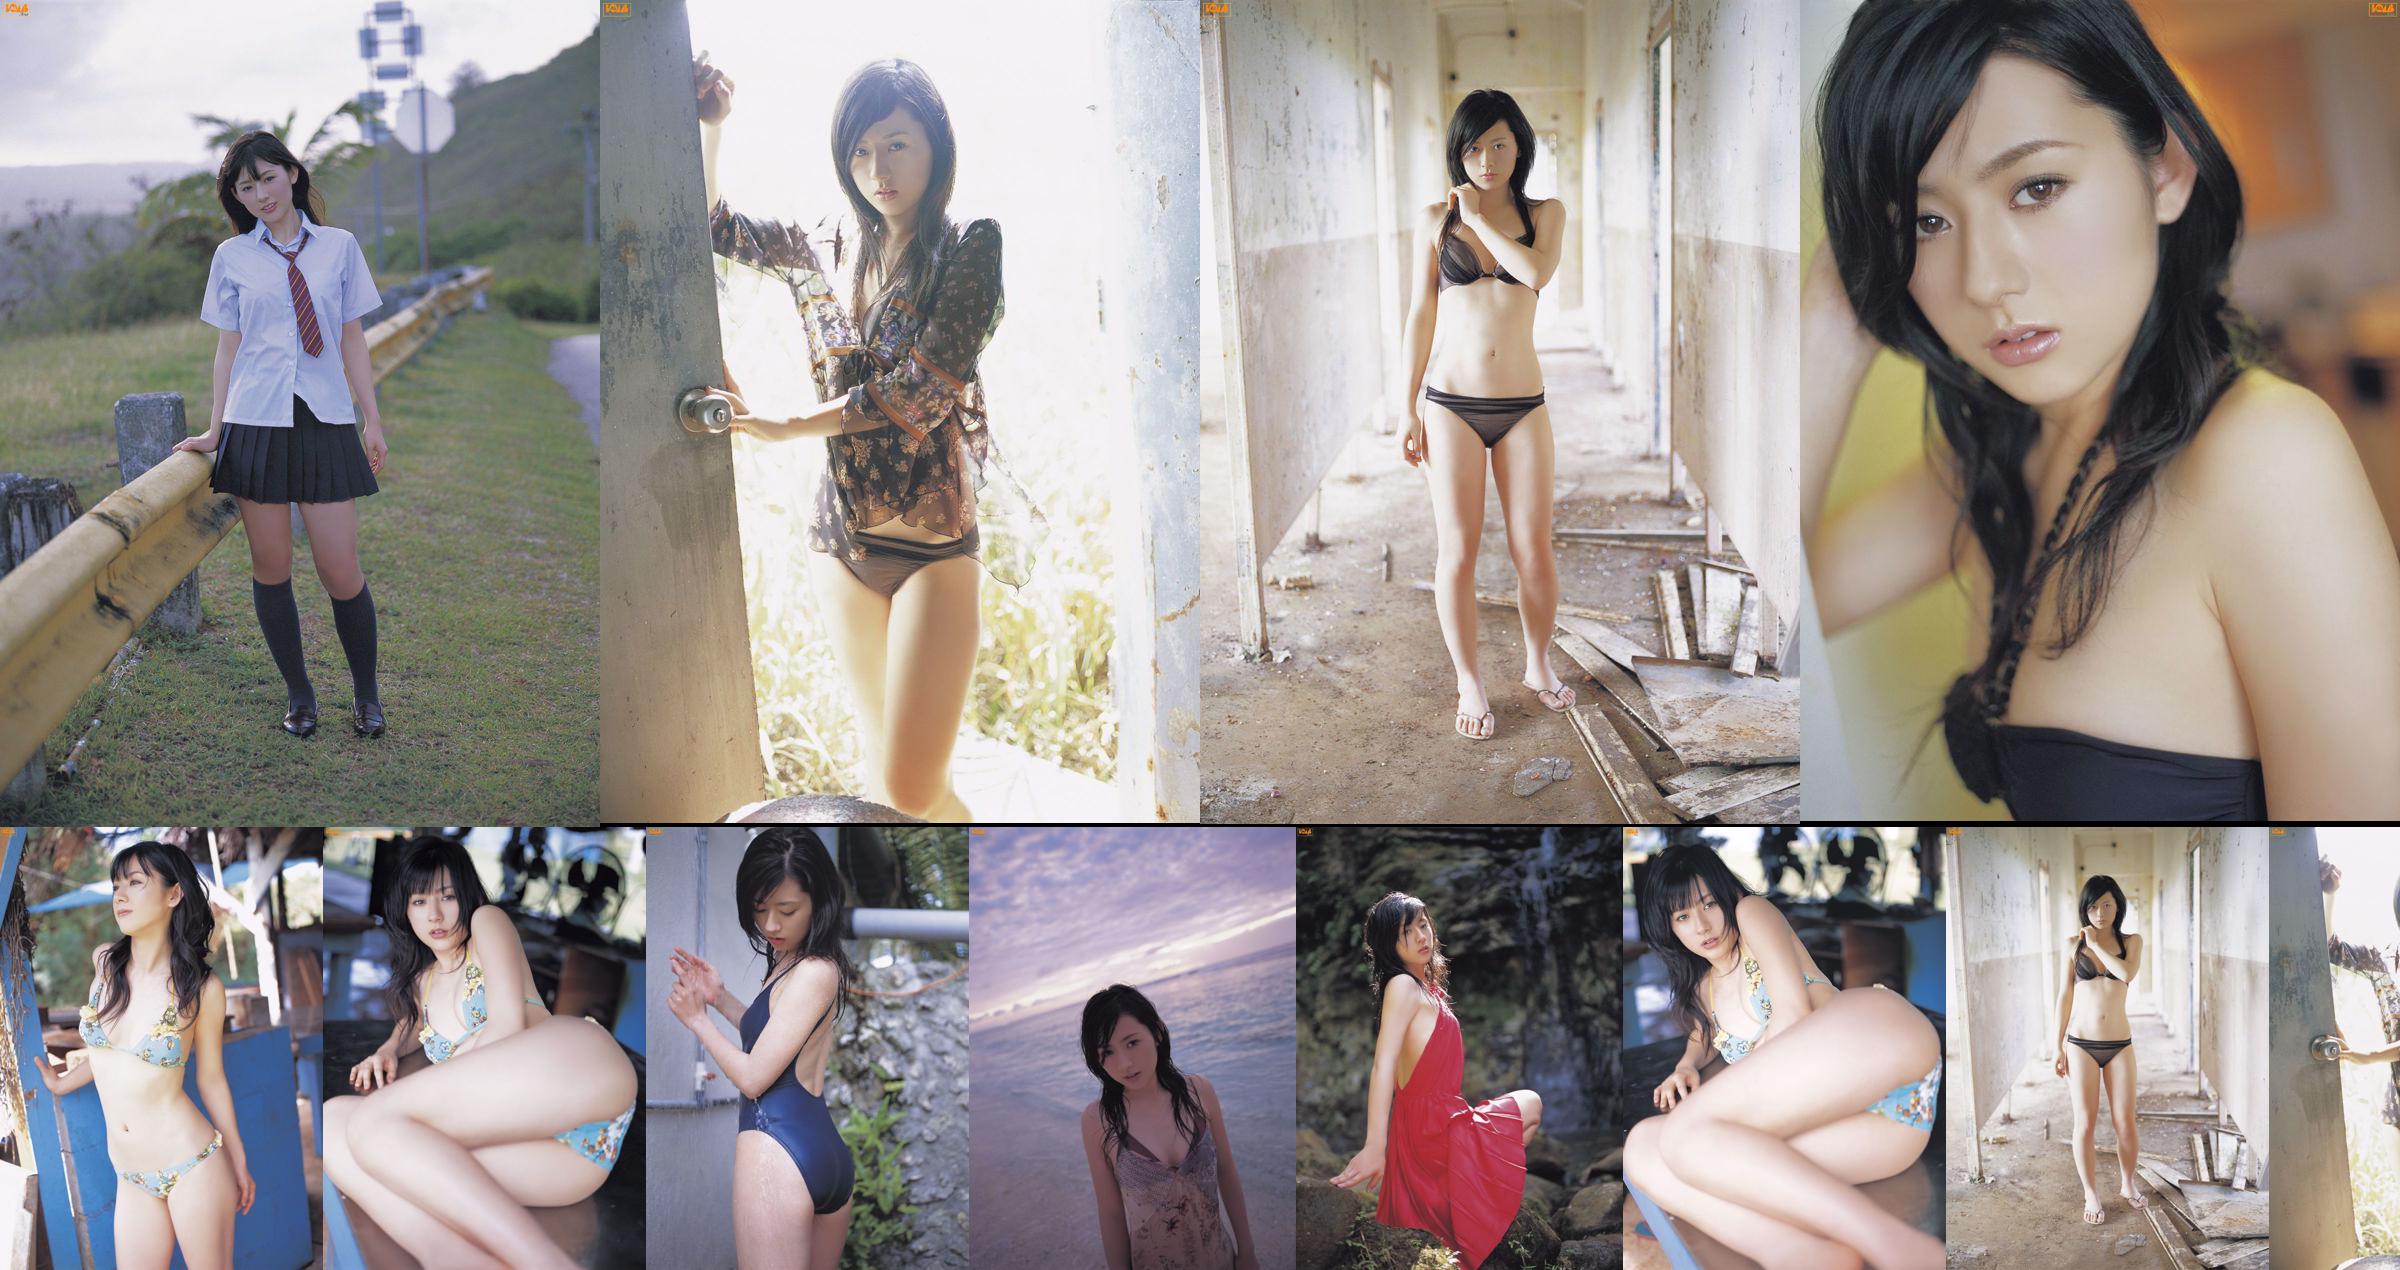 [Bomb.TV] May 2007 Miki Inase Miki Reo / Miki Reo No.01f9c2 Page 2